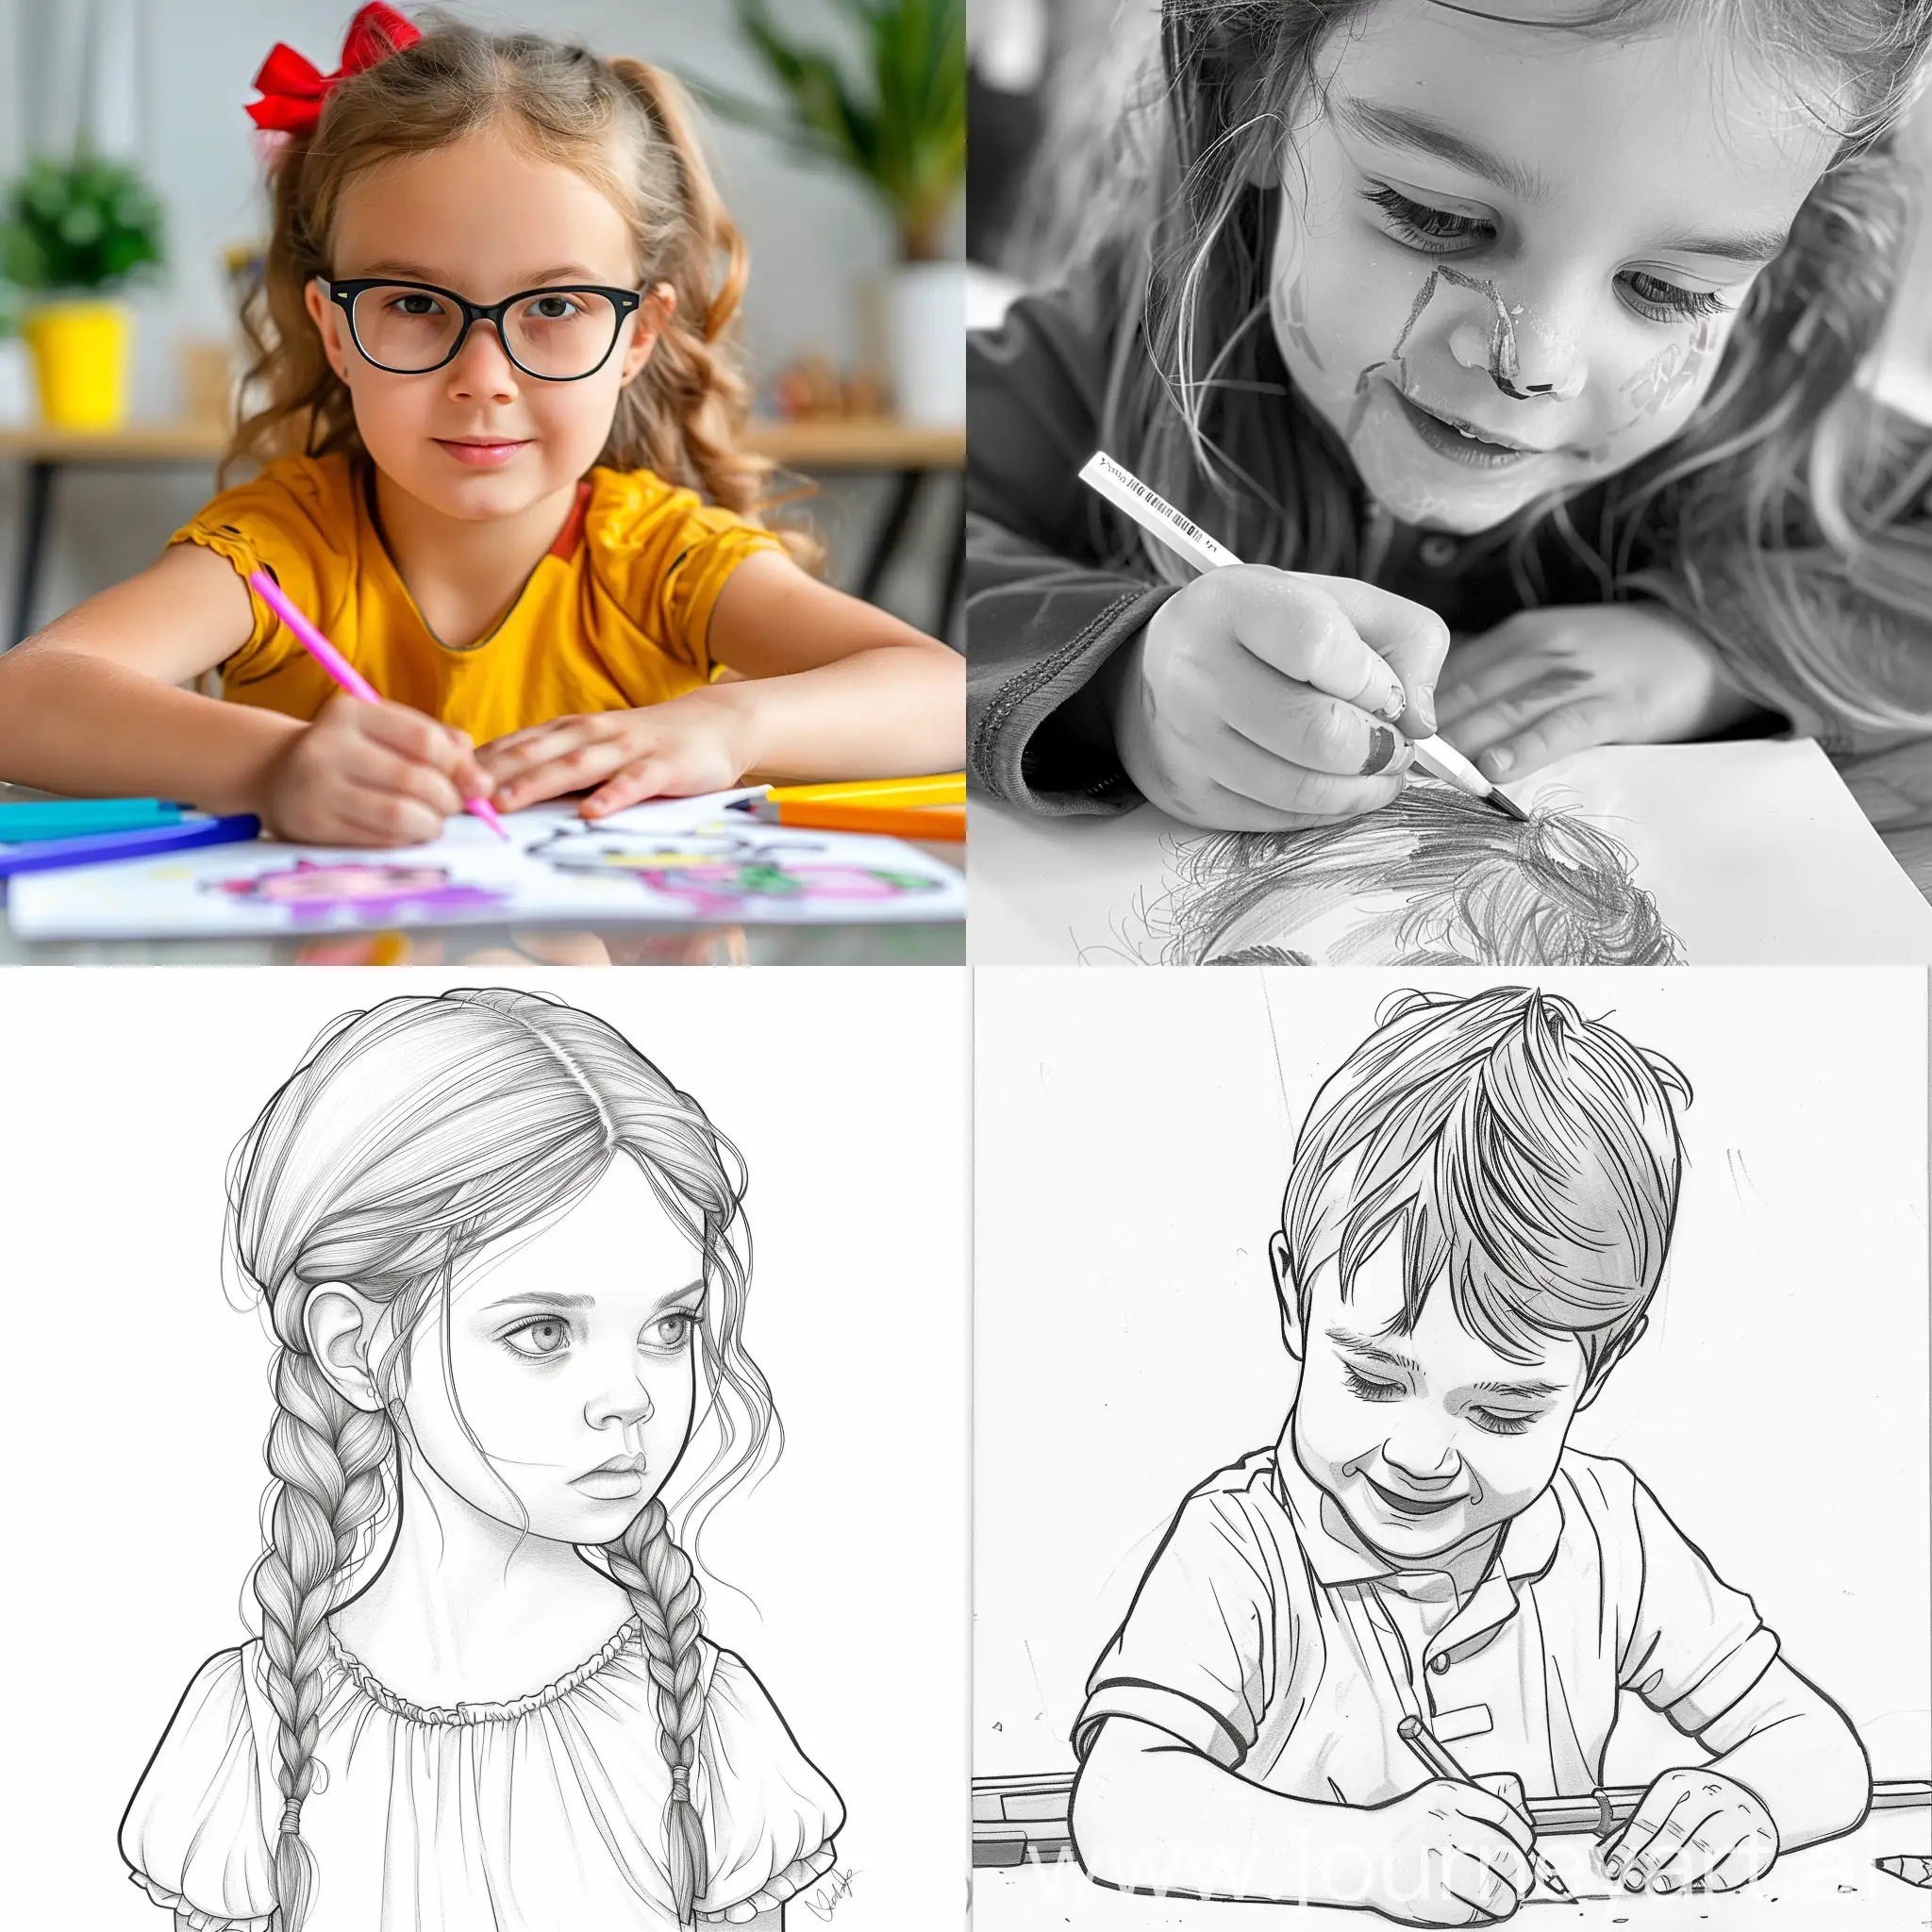 Vibrant-Model-Drawing-Coloring-for-8YearOld-Child